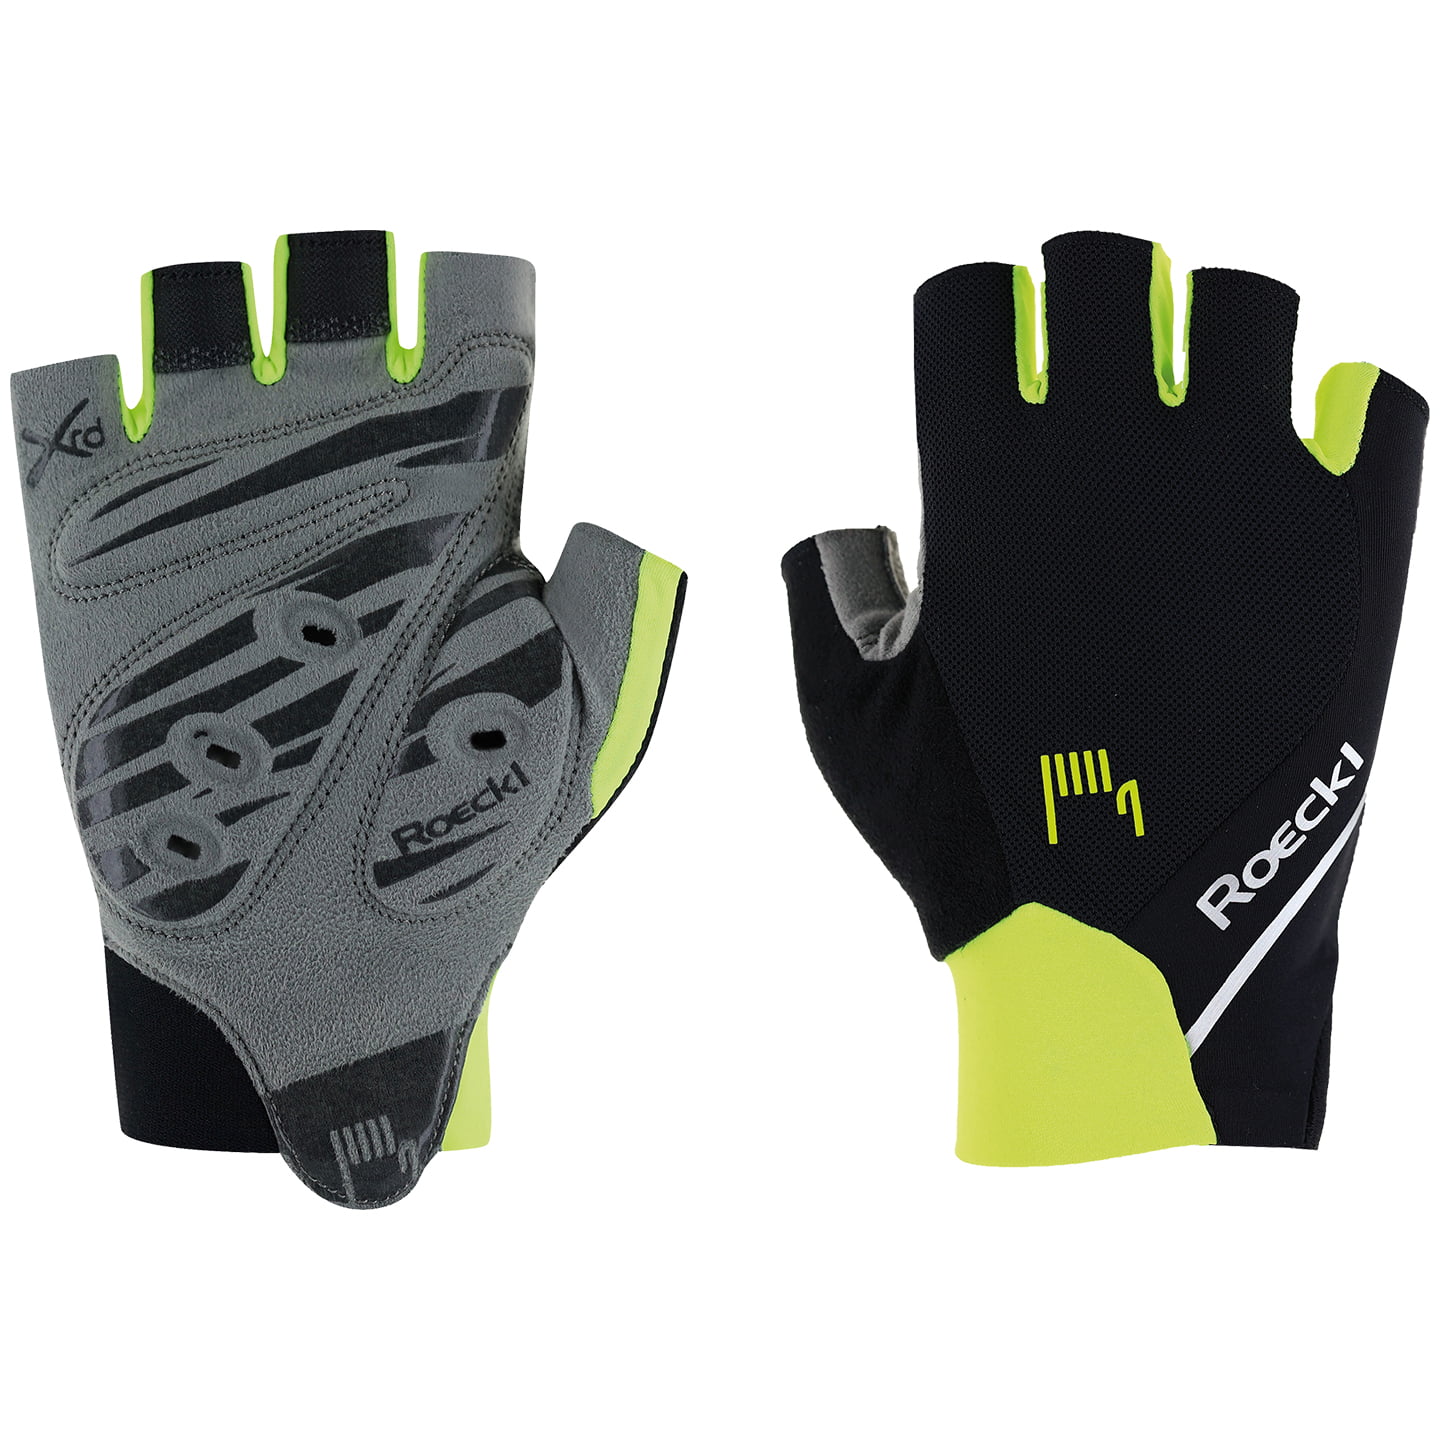 ROECKL Mori Full Finger Gloves, for men, size 7, Cycling gloves, Cycling clothes